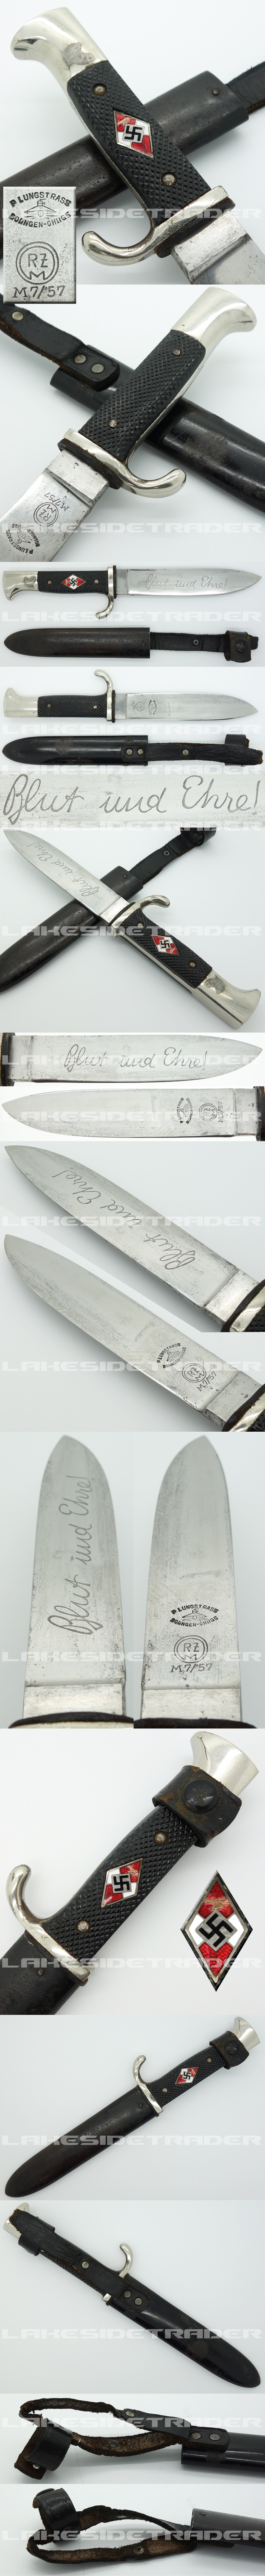 Transitional Hitler Youth Knife by P. Lungstrass